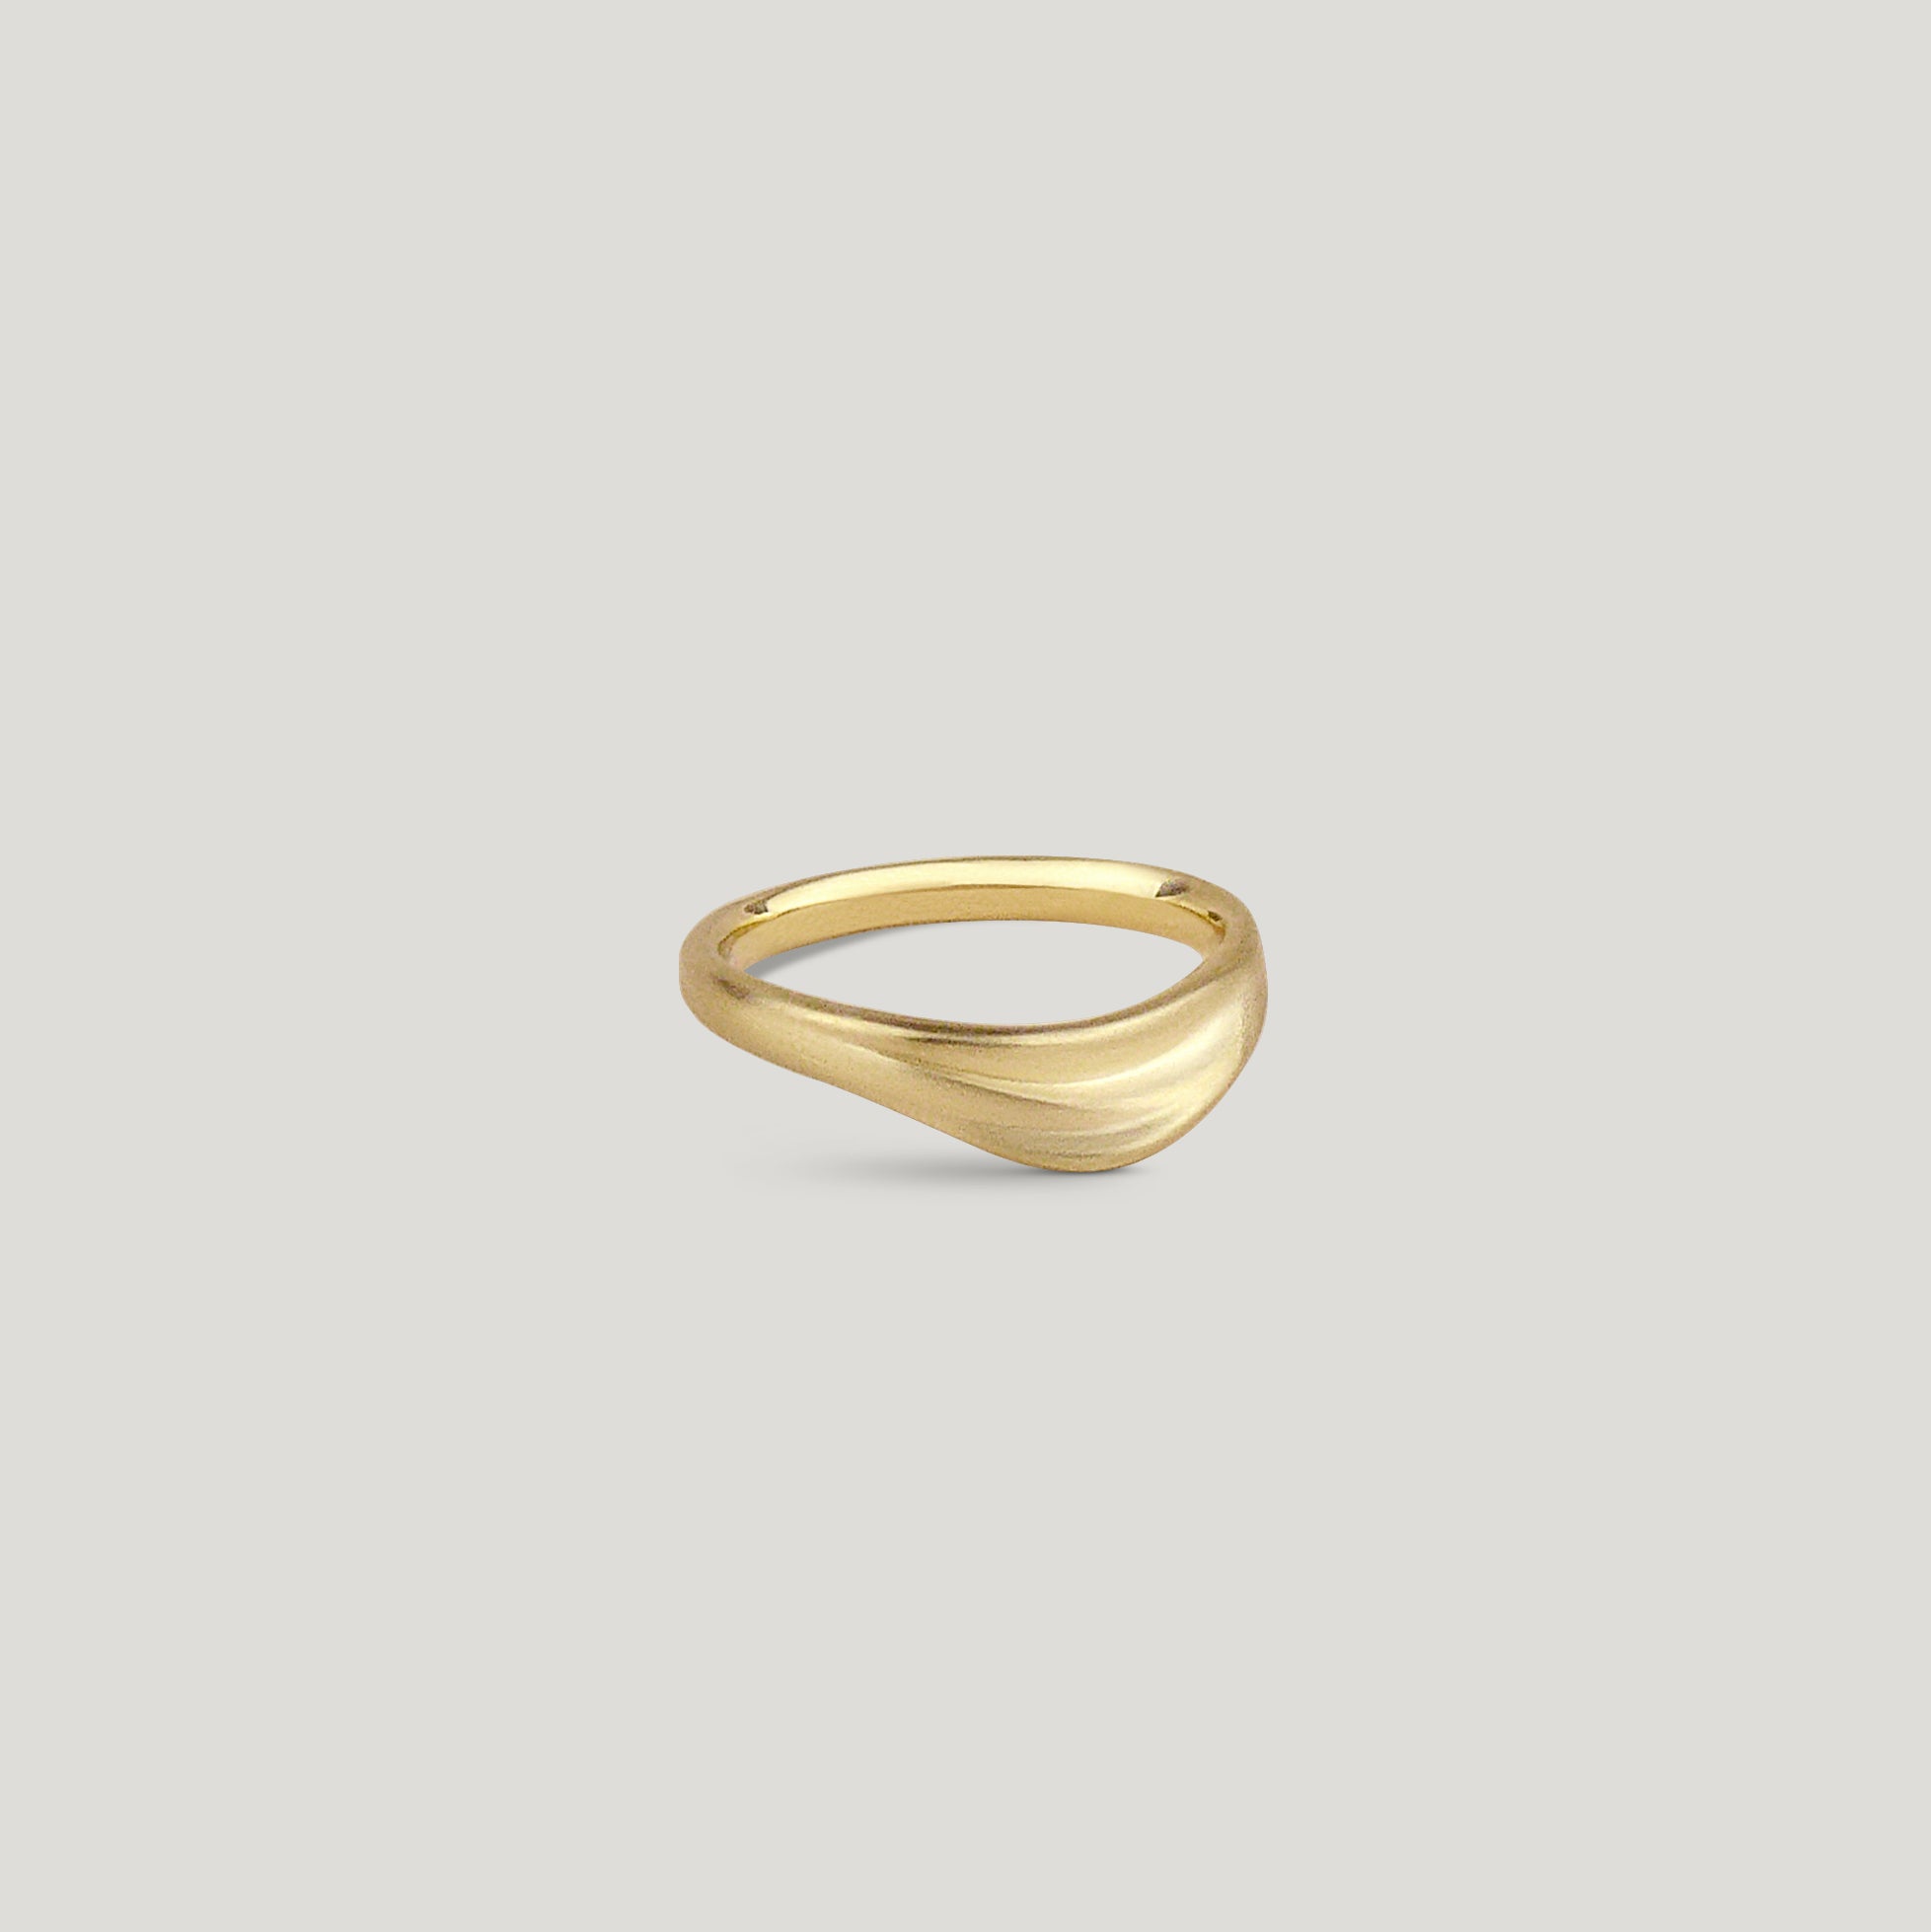 Curved dune gold wedding ring with organic texture